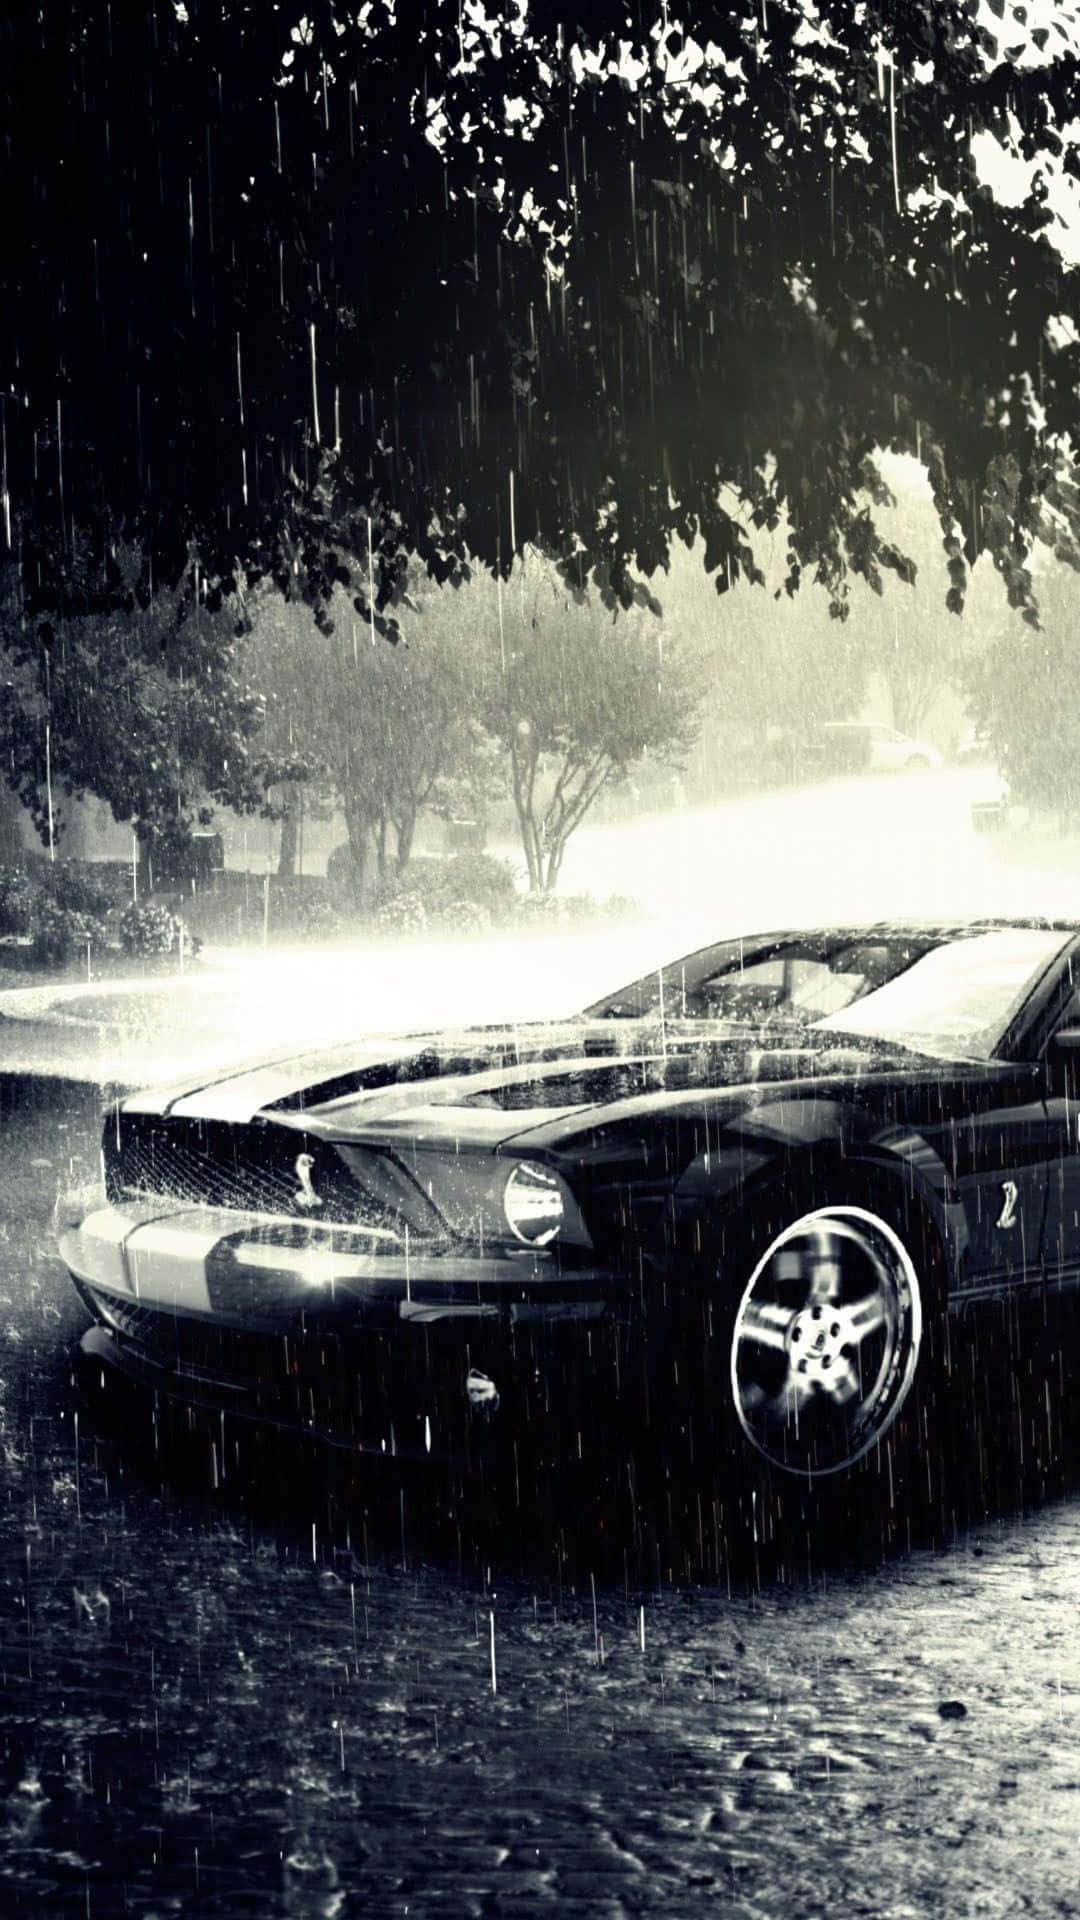 Experience the thrill of owning a Mustang by downloading the official Mustang iPhone app Wallpaper